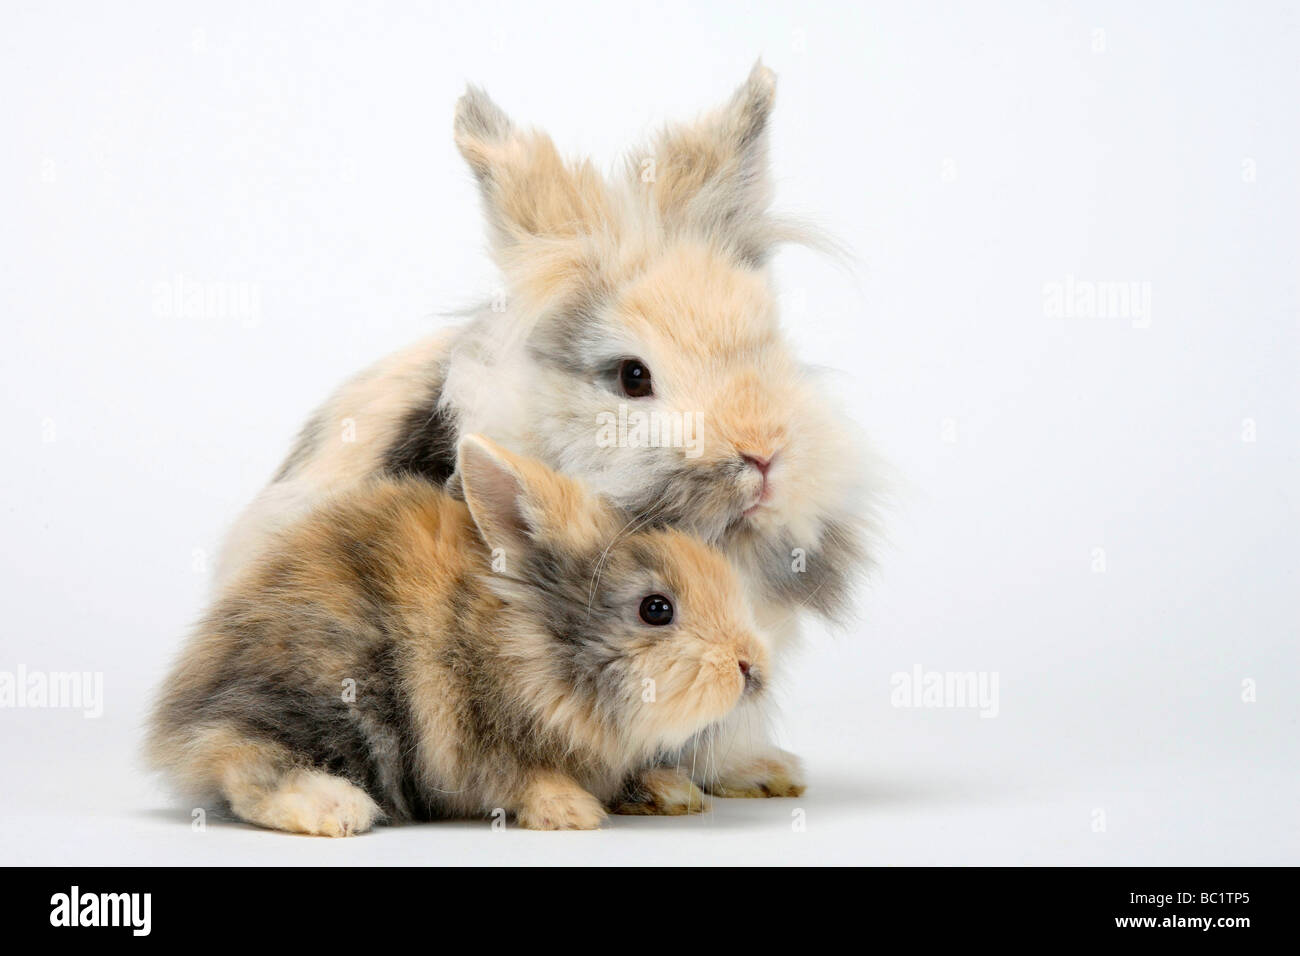 Lion-maned Dwarf Rabbit and young Domestic Rabbit Stock Photo